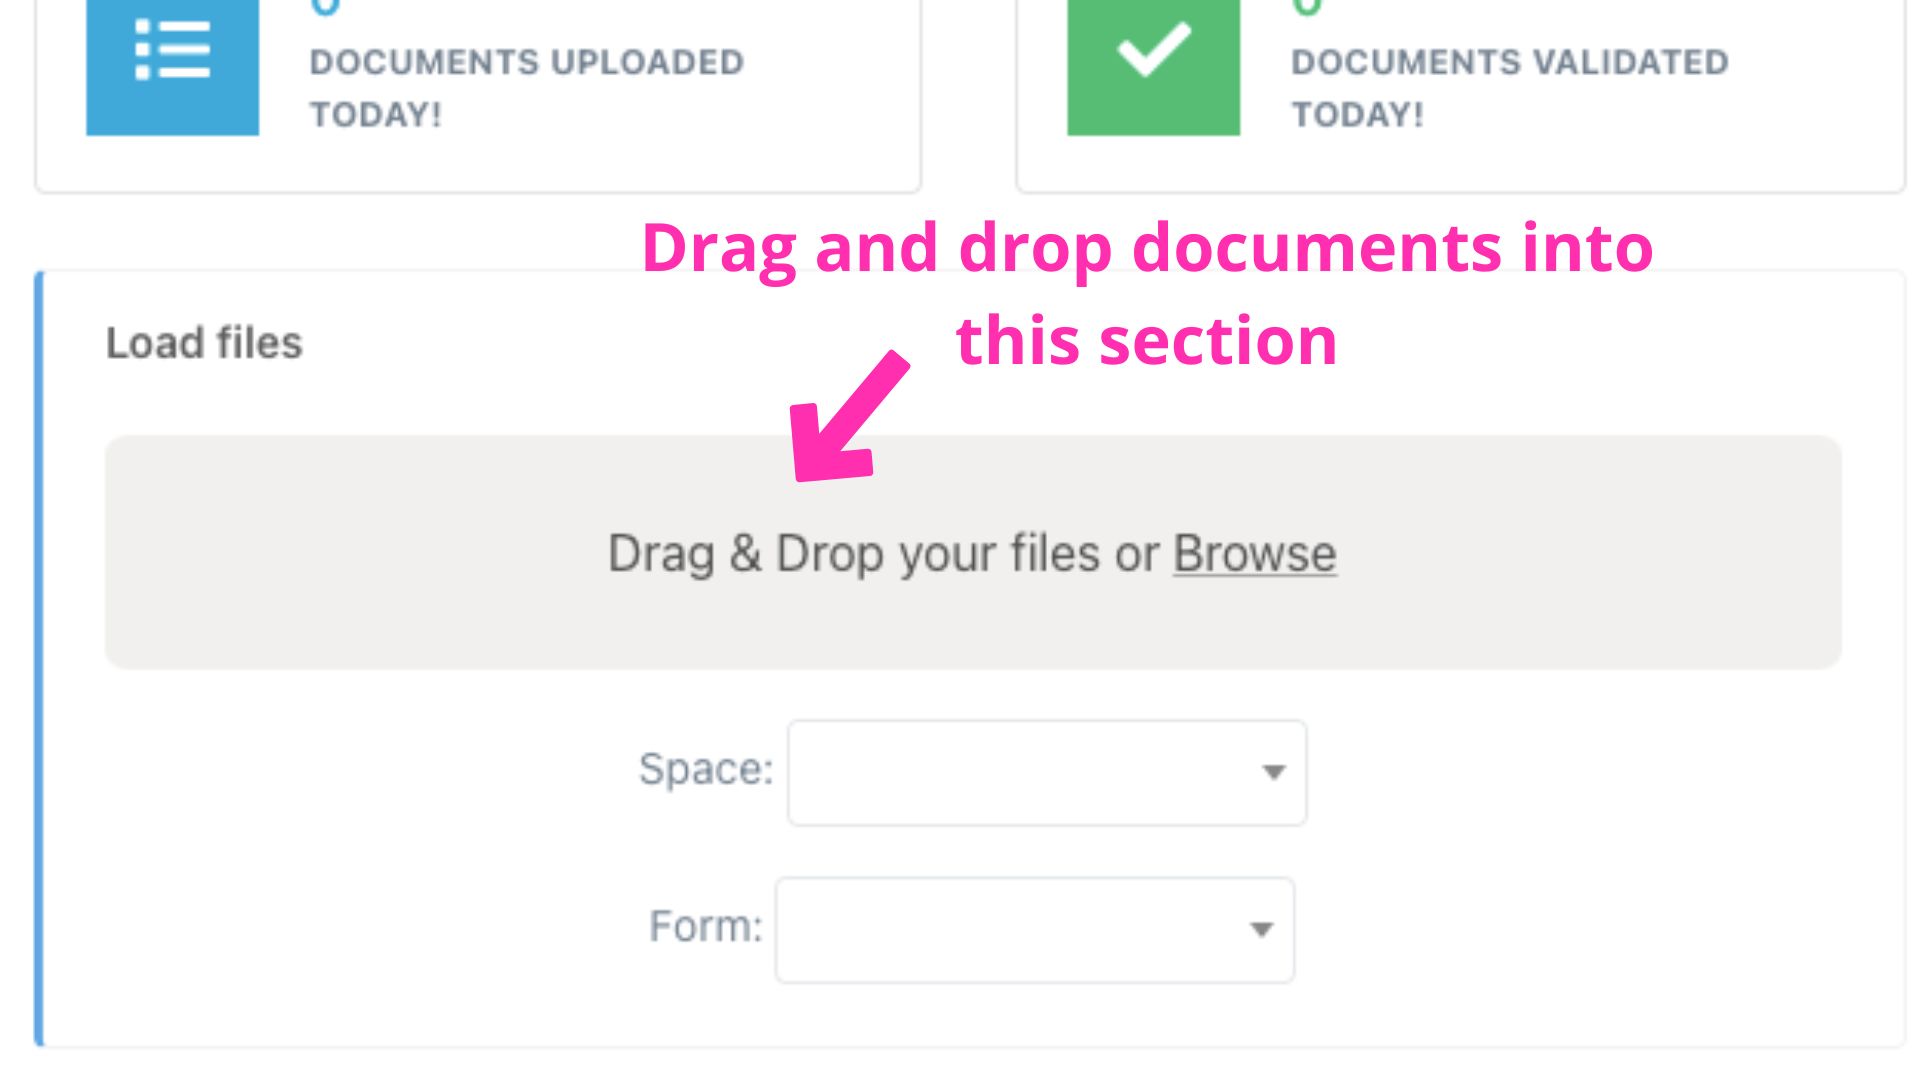 Drag_and_drop_documents_into_this_section.jpg